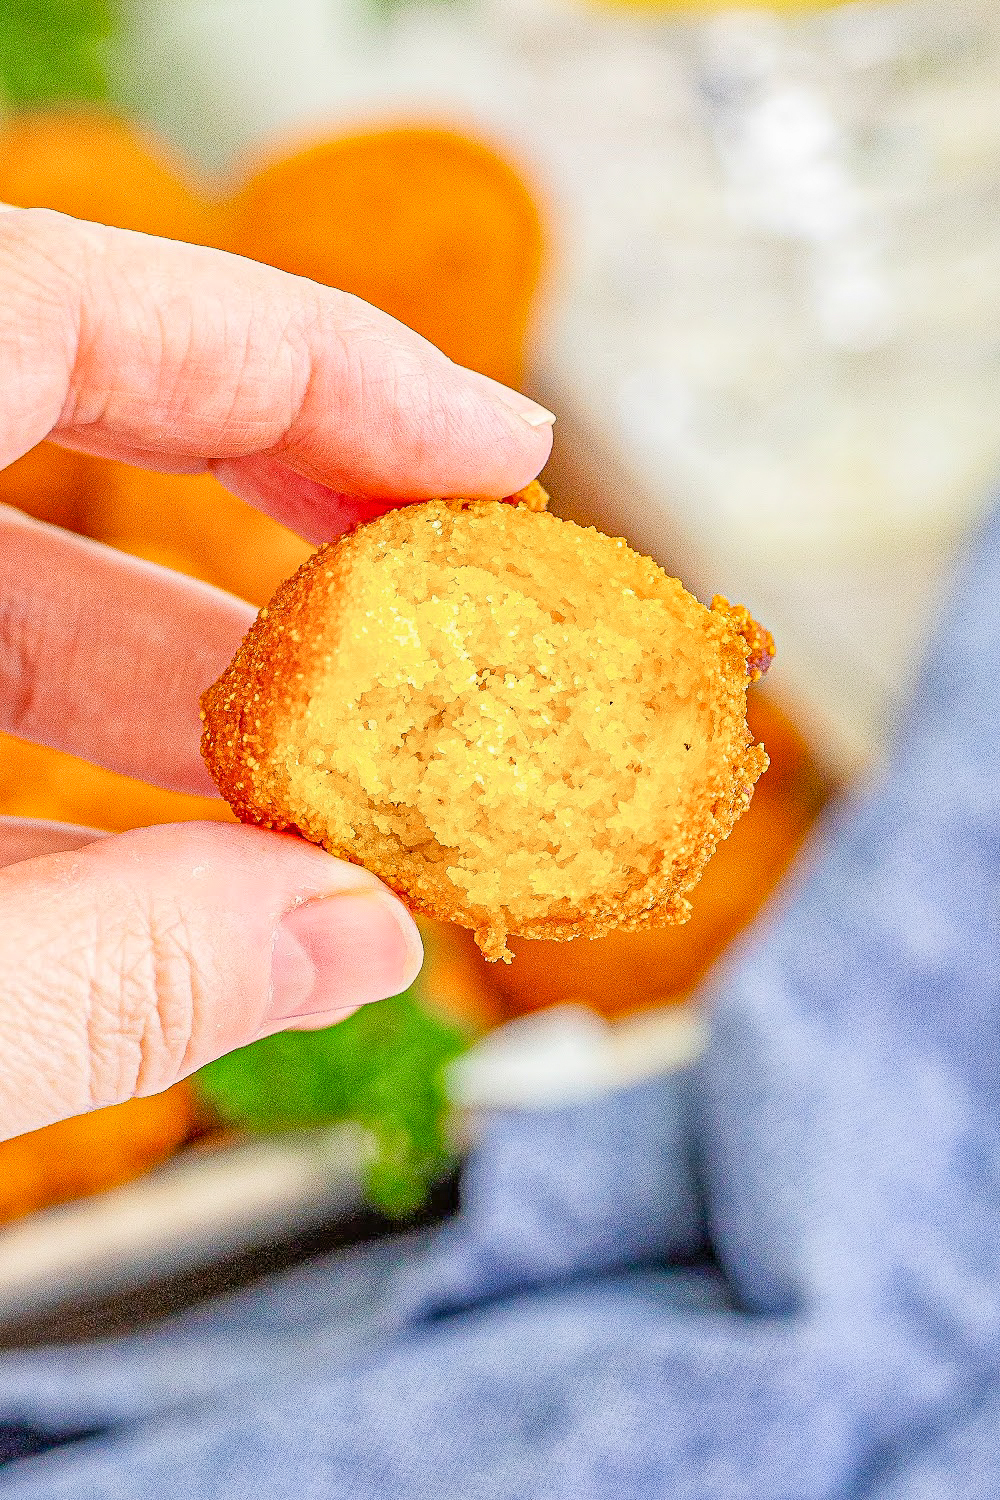 A woman's hand hold a single hush puppy with a missing bite.